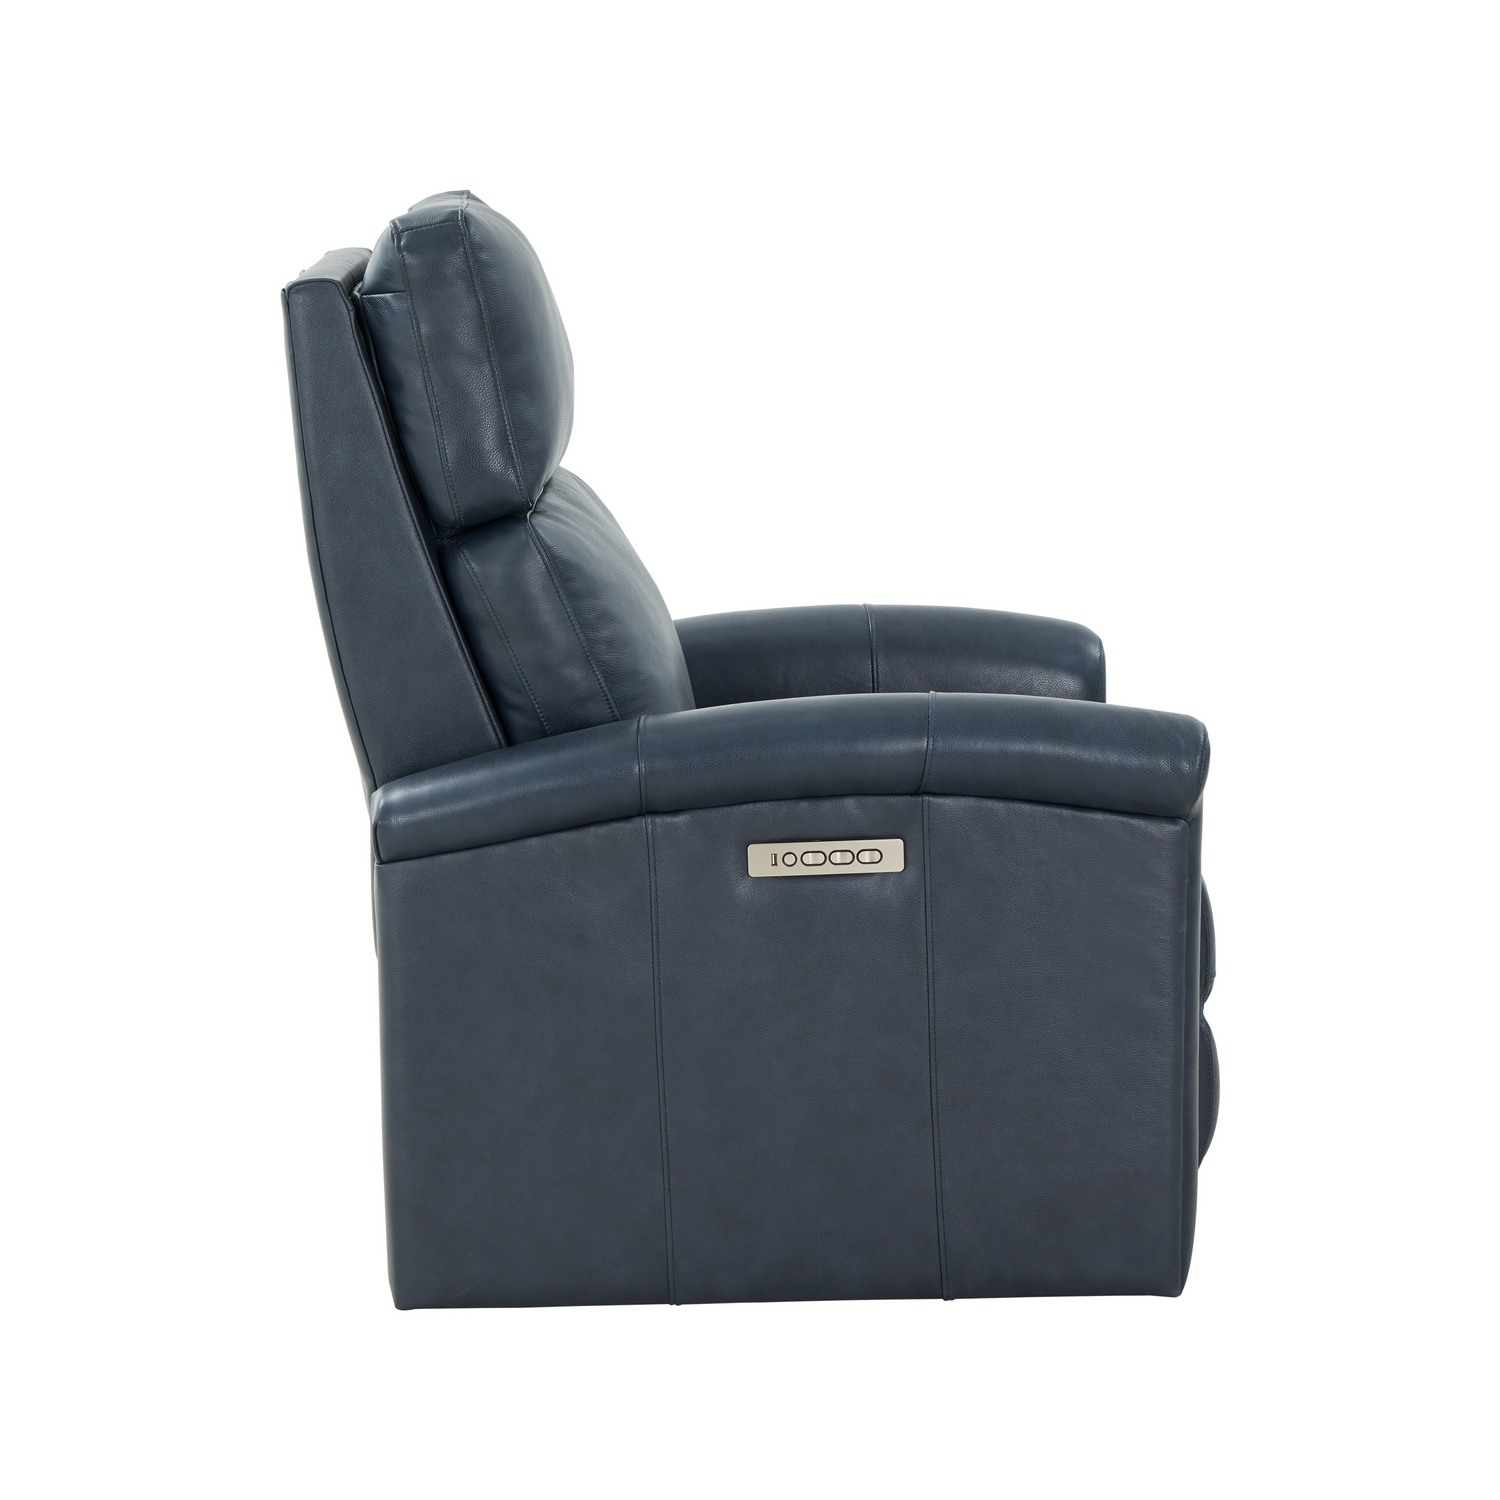 Barcalounger Jaxon Zero Gravity Power Recliner Chair with Power Head Rest and Lumbar - Barone Navy Blue/All Leather